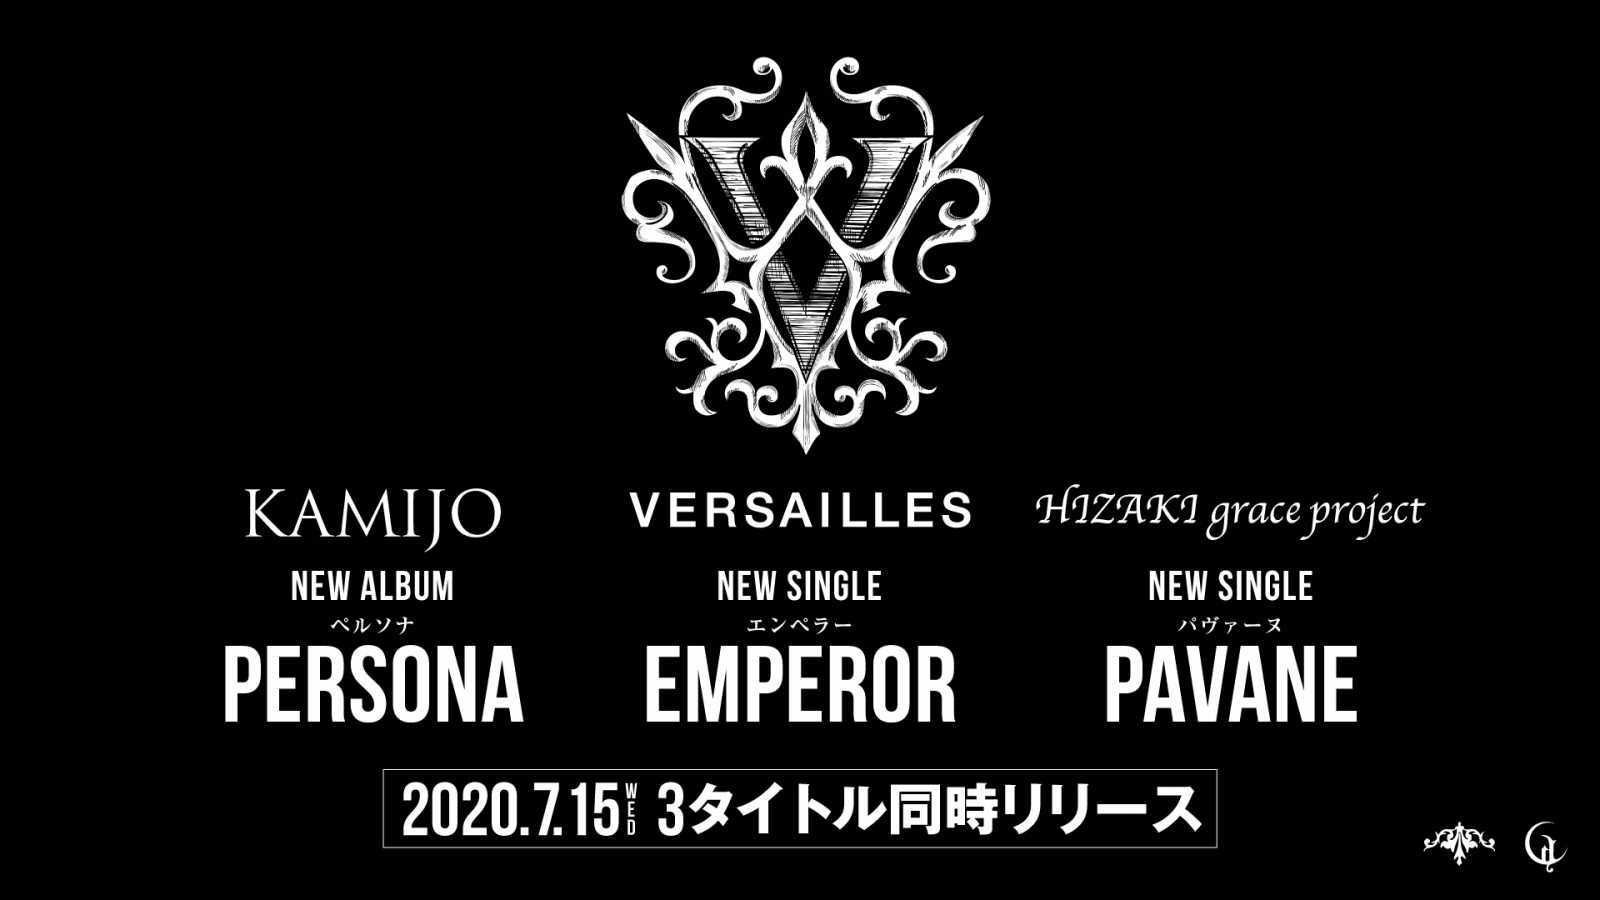 New Releases from VERSAILLES, KAMIJO and HIZAKI grace project © CHATEAU AGENCY CO., Ltd. All rights reserved.